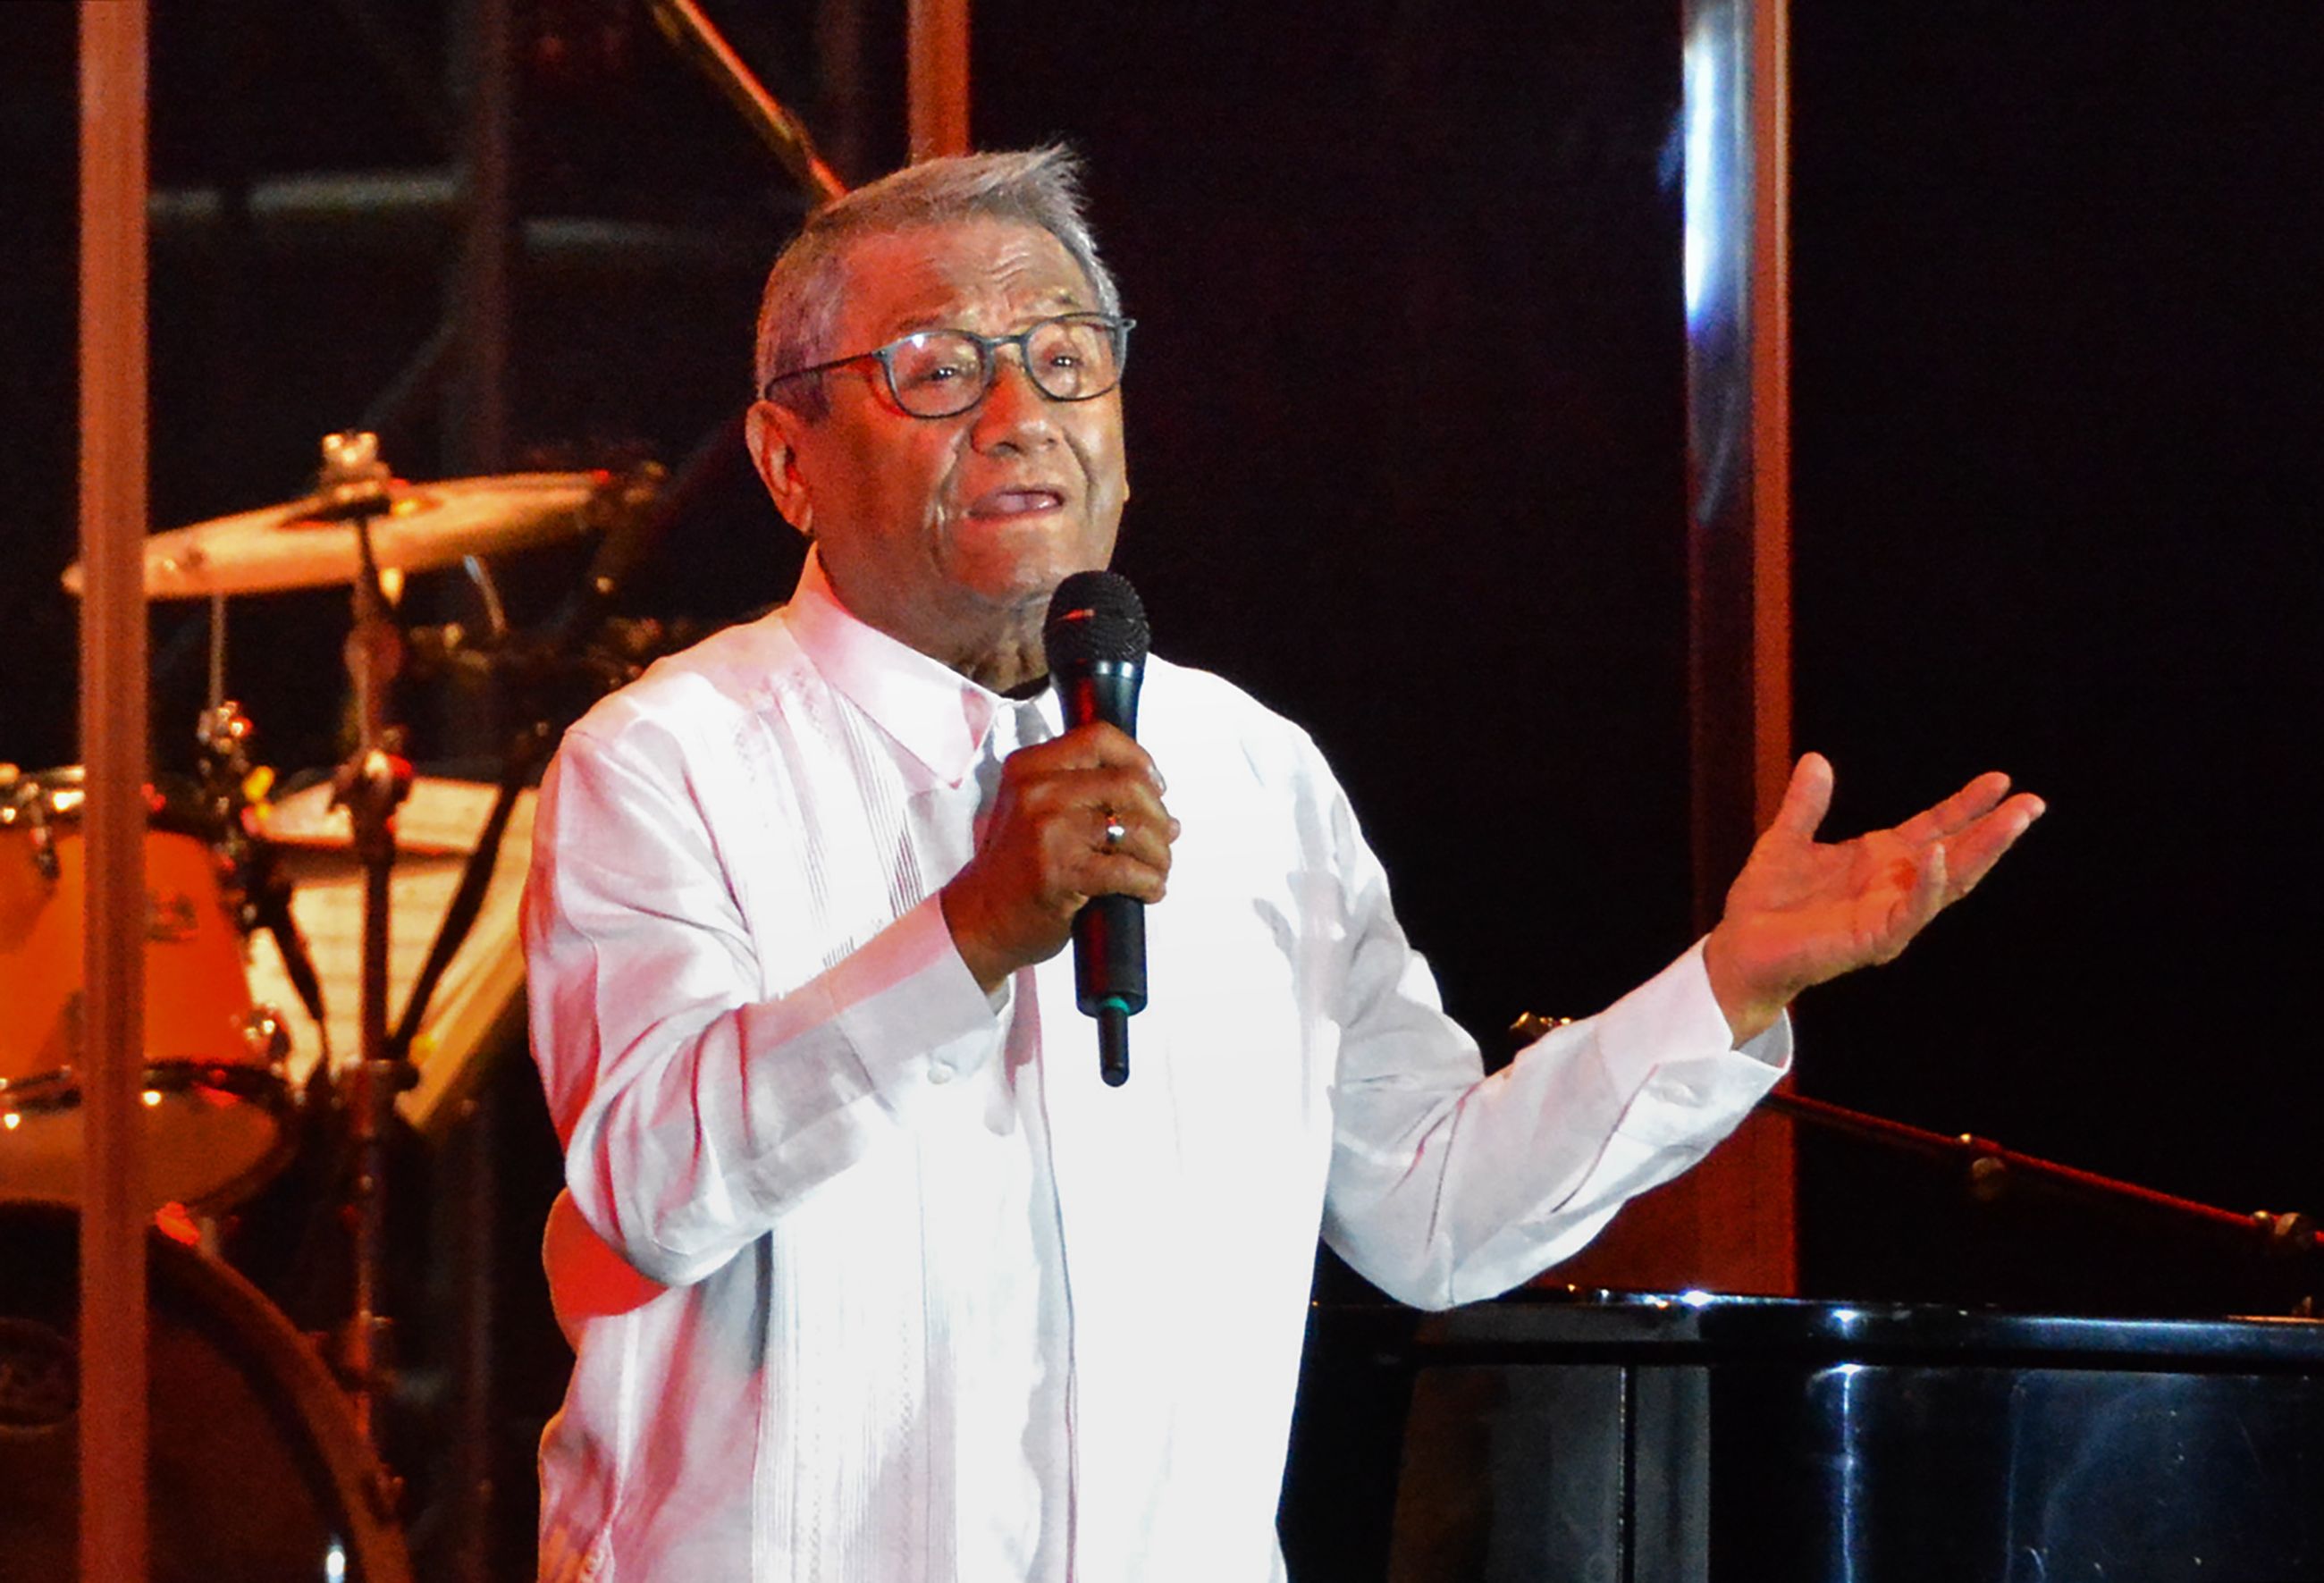 (FILES) In this file photo taken on July 15, 2018 Mexican singer and composer Armando Manzanero performs with members of Buenavista Social Club, during his show in Havana. - Mexican singer-songwriter Armando Manzanero, one of the most popular composers of romantic Latin ballads and boleros, died early on December 28, 2020 from coronavirus-related complications, Mexican President Andres Manuel Lopez Obrador announced. (Photo by JORGE BELTRAN / AFP)